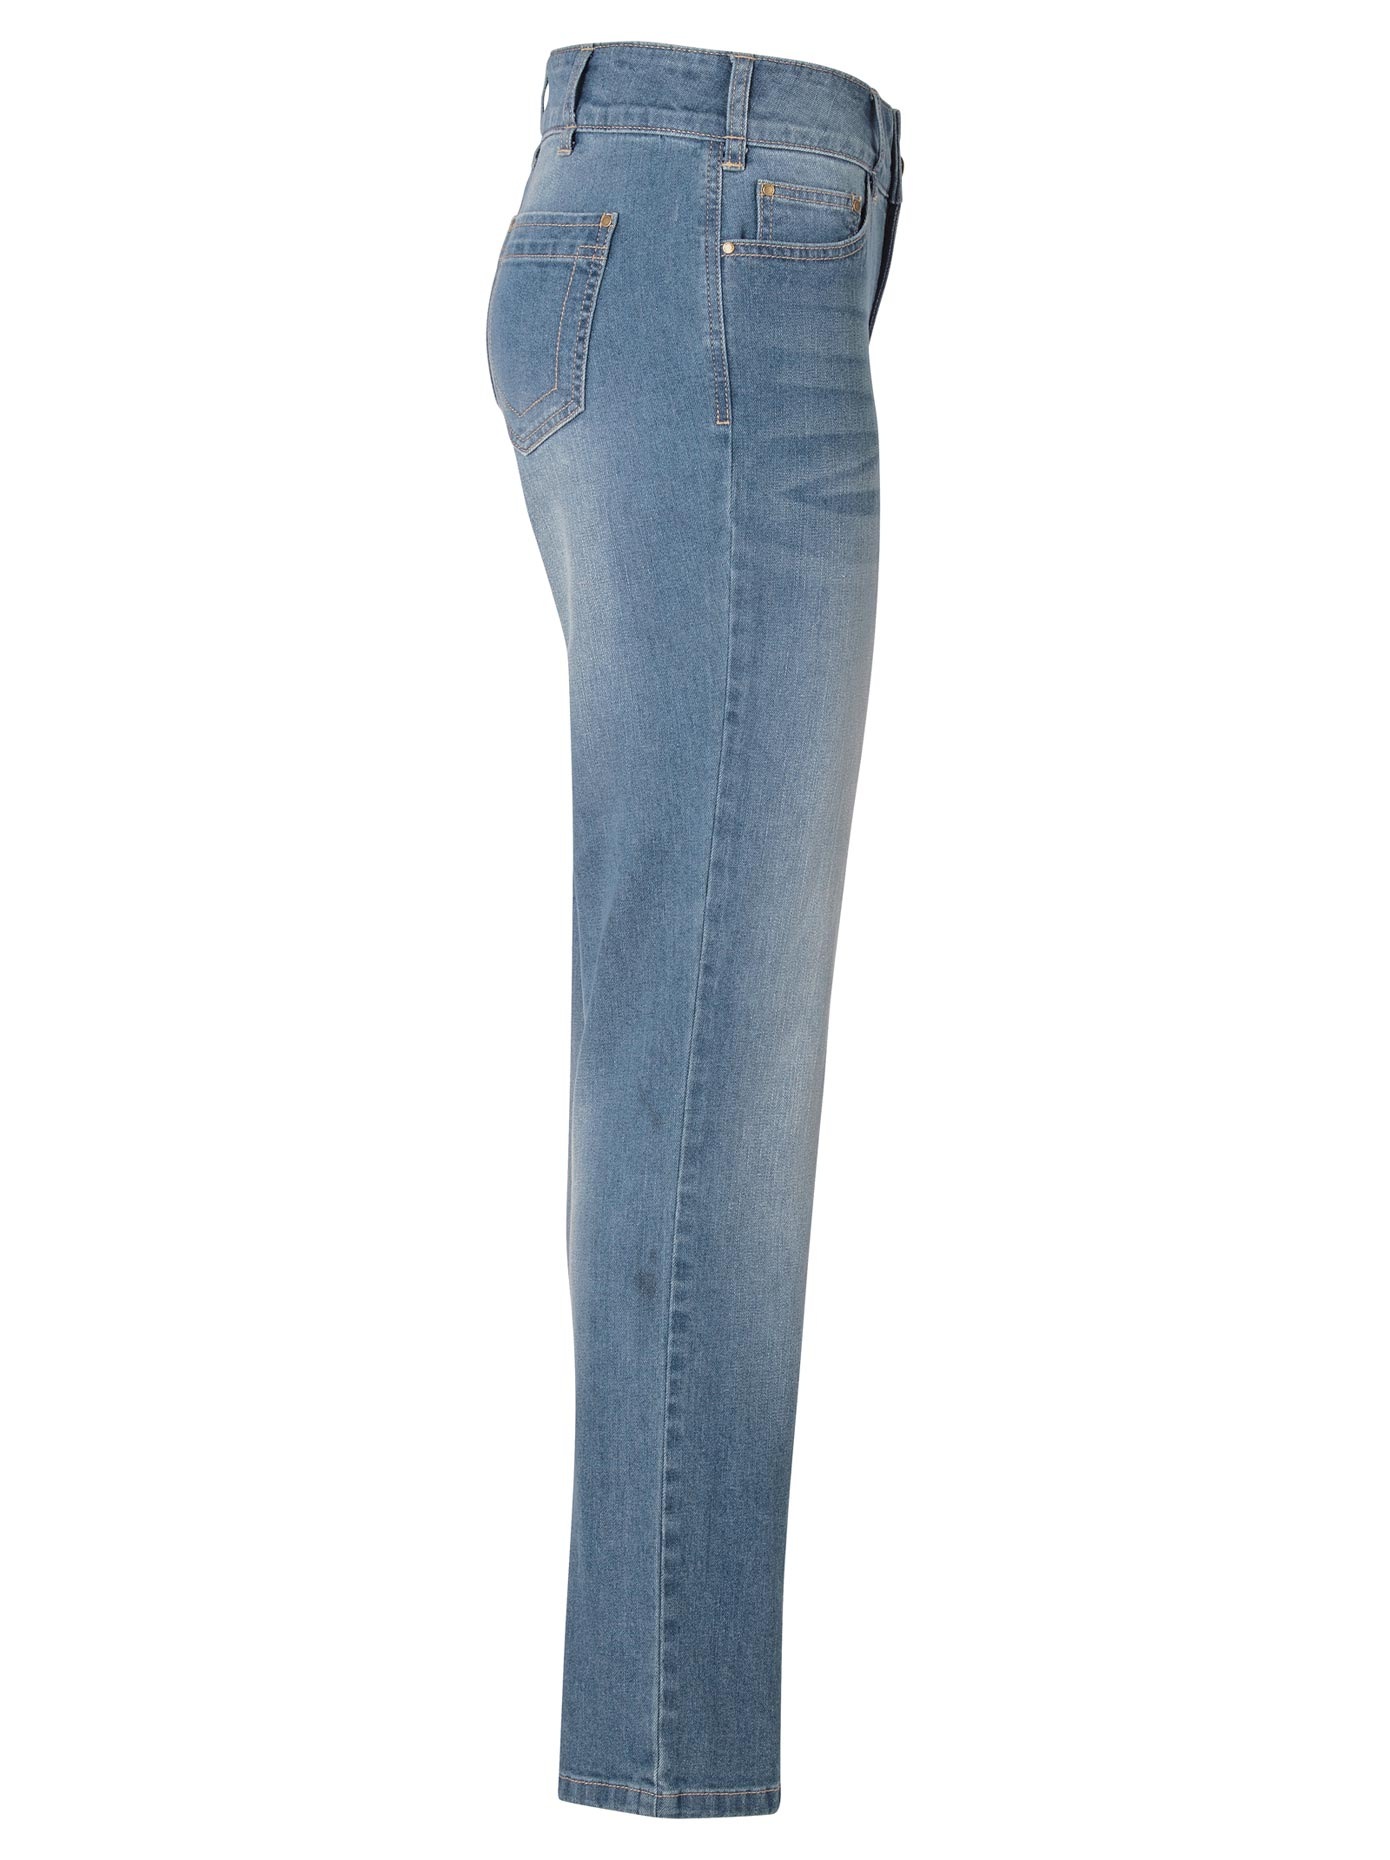 (1 Bequeme OTTO im Casual Shop Online Jeans, tlg.) Looks